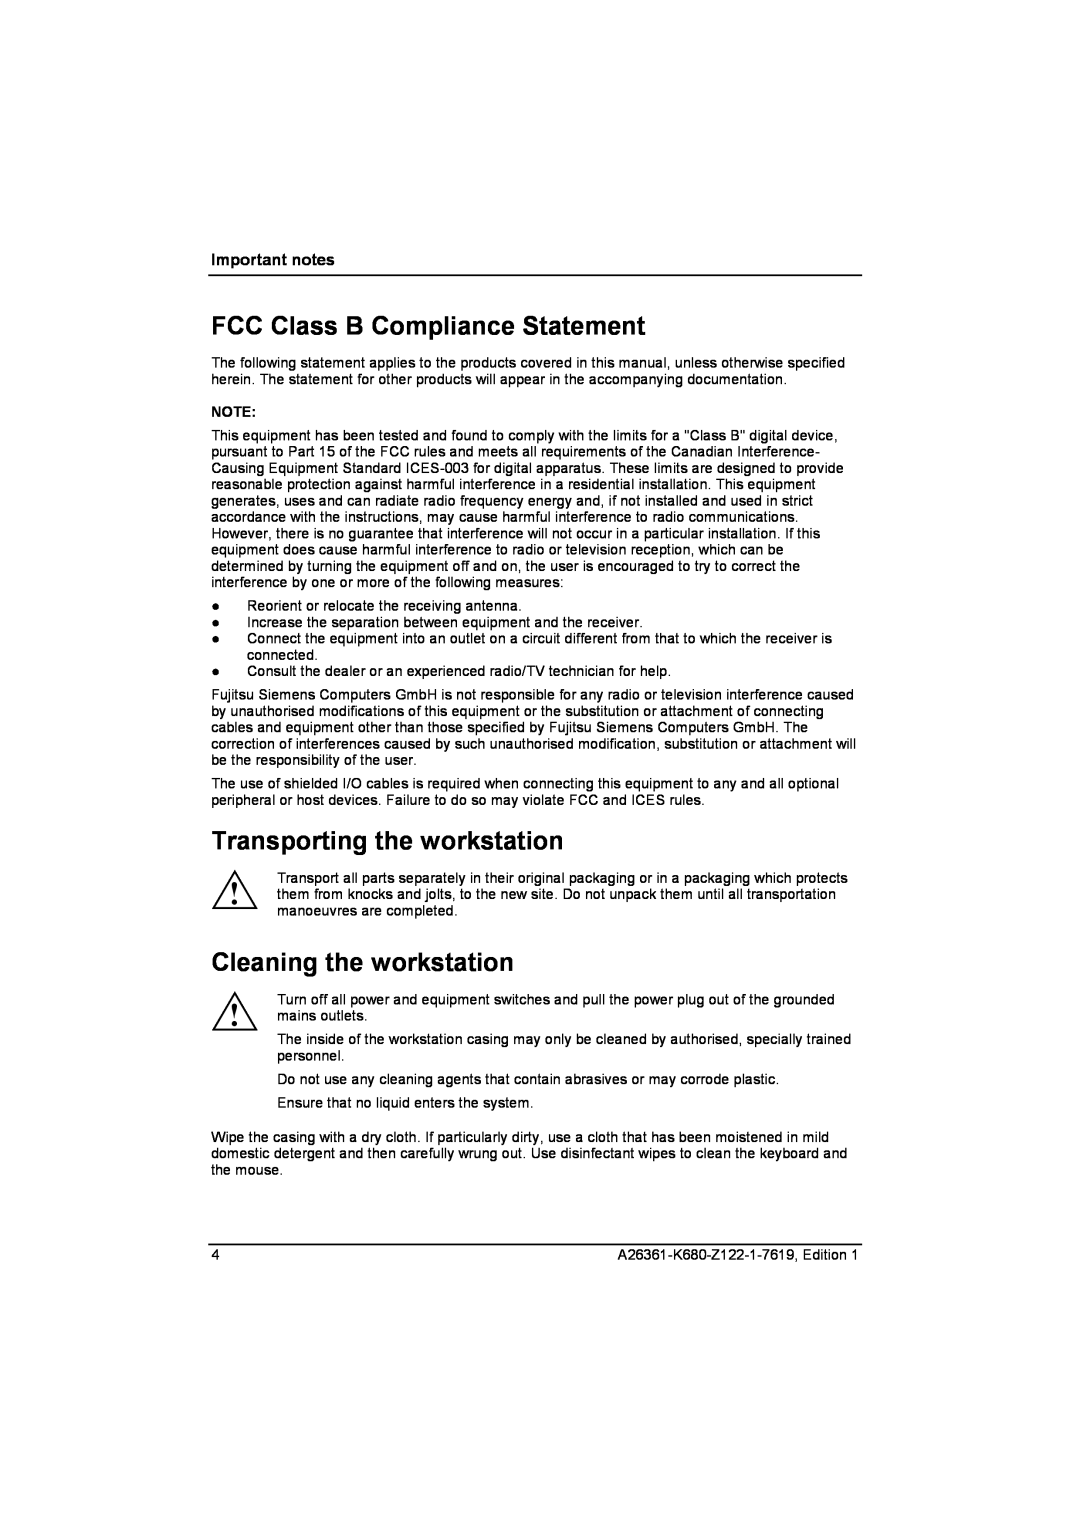 Fujitsu V810 FCC Class B Compliance Statement, Transporting the workstation, Cleaning the workstation, Important notes 